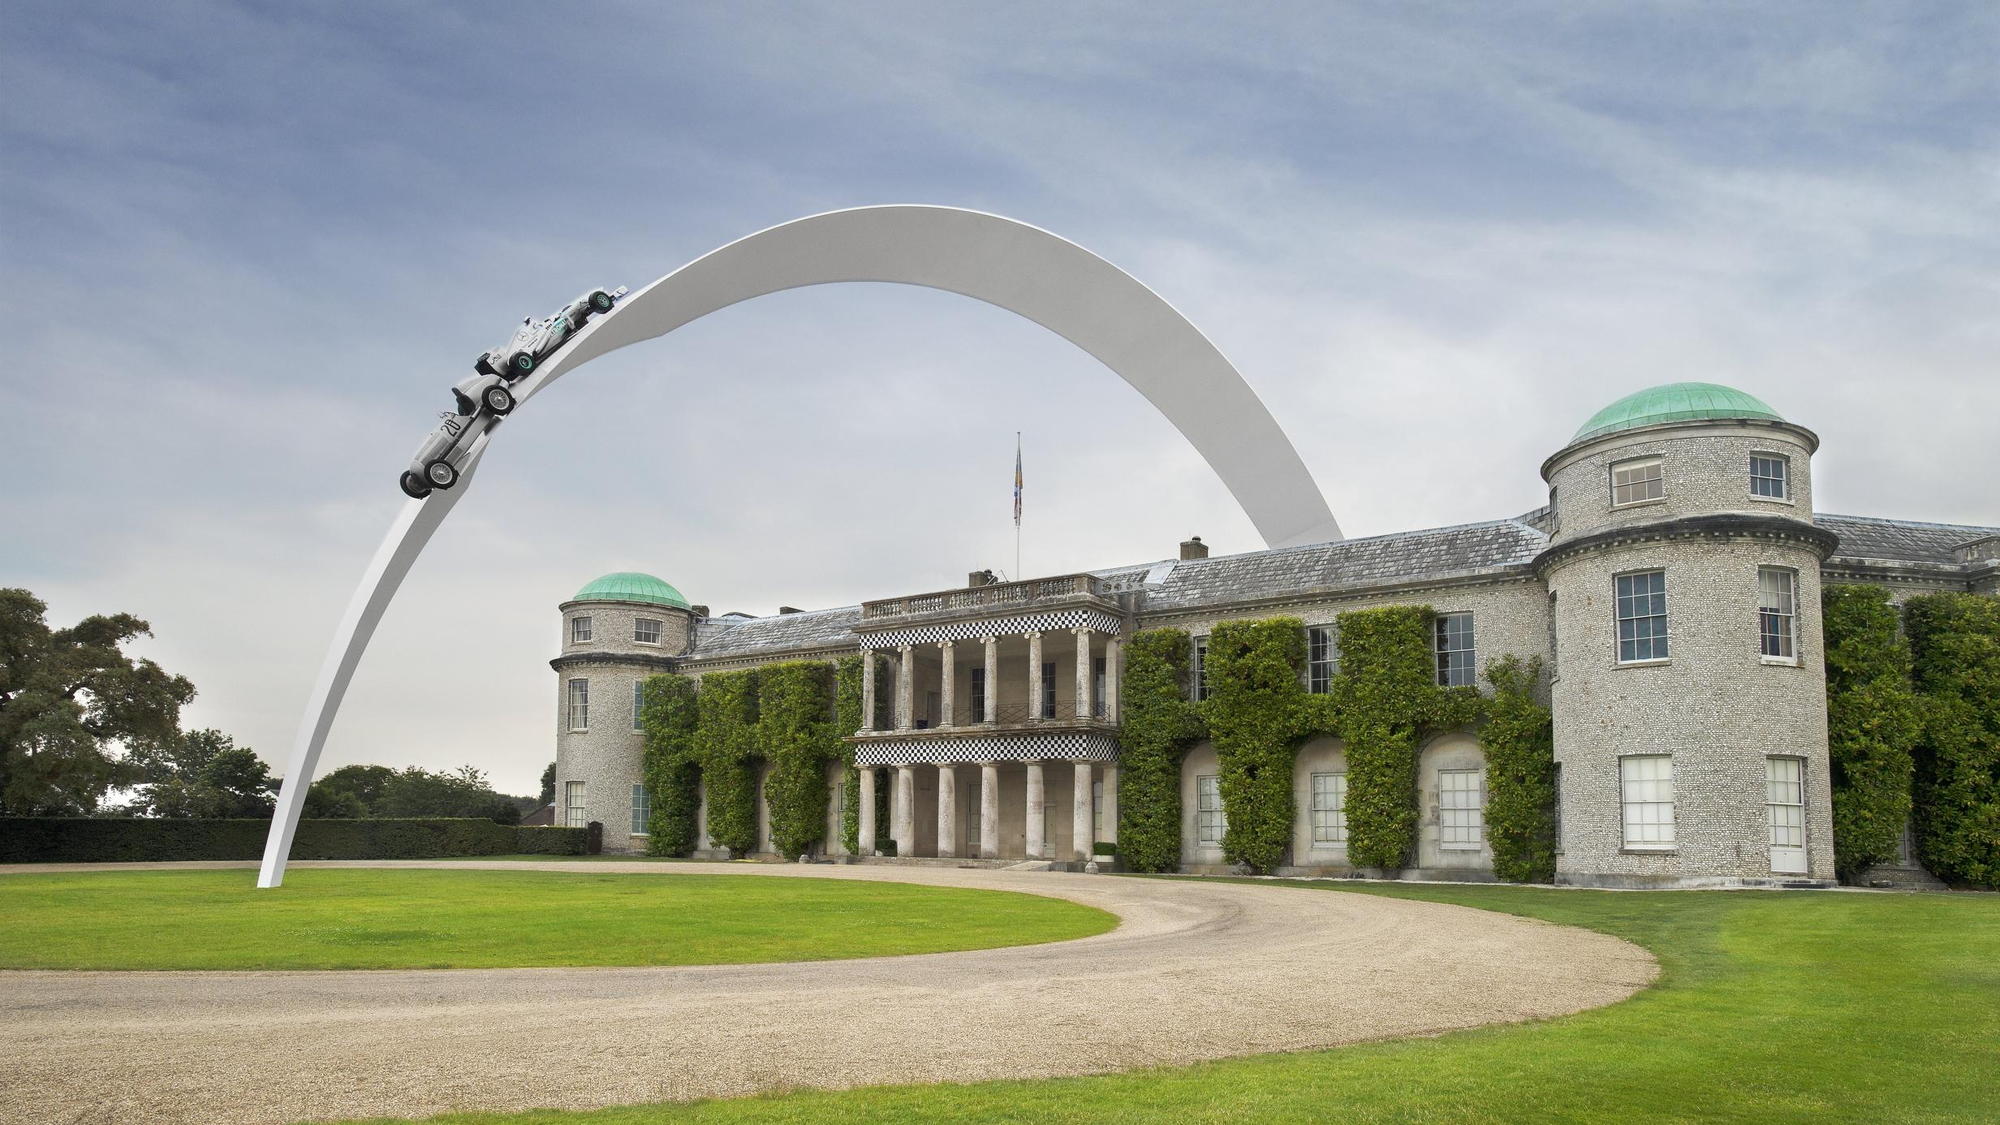 2014 Goodwood Festival of Speed Central Feature honors Mercedes-Benz